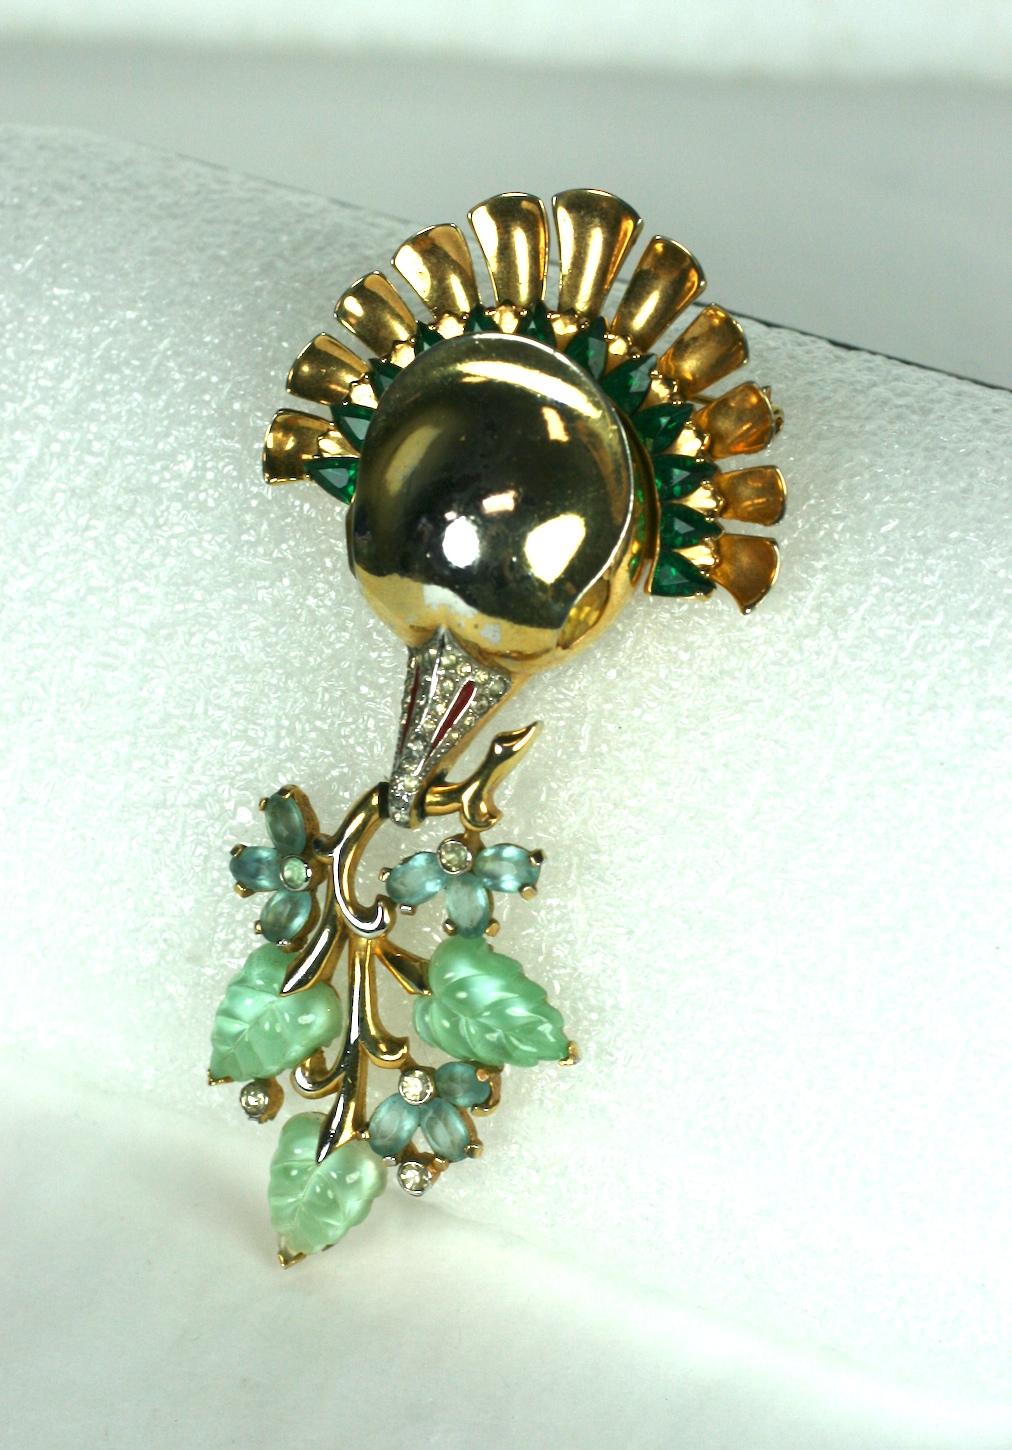 Amazing and Rare Mazer Fruit Salad Bird Brooch from the 1930's. A large gilt bird's head with pave beak is set with faux emerald triangular stones along the collar. Clasped in the bird's mouth is an articulated vine of green moonstone leaves and